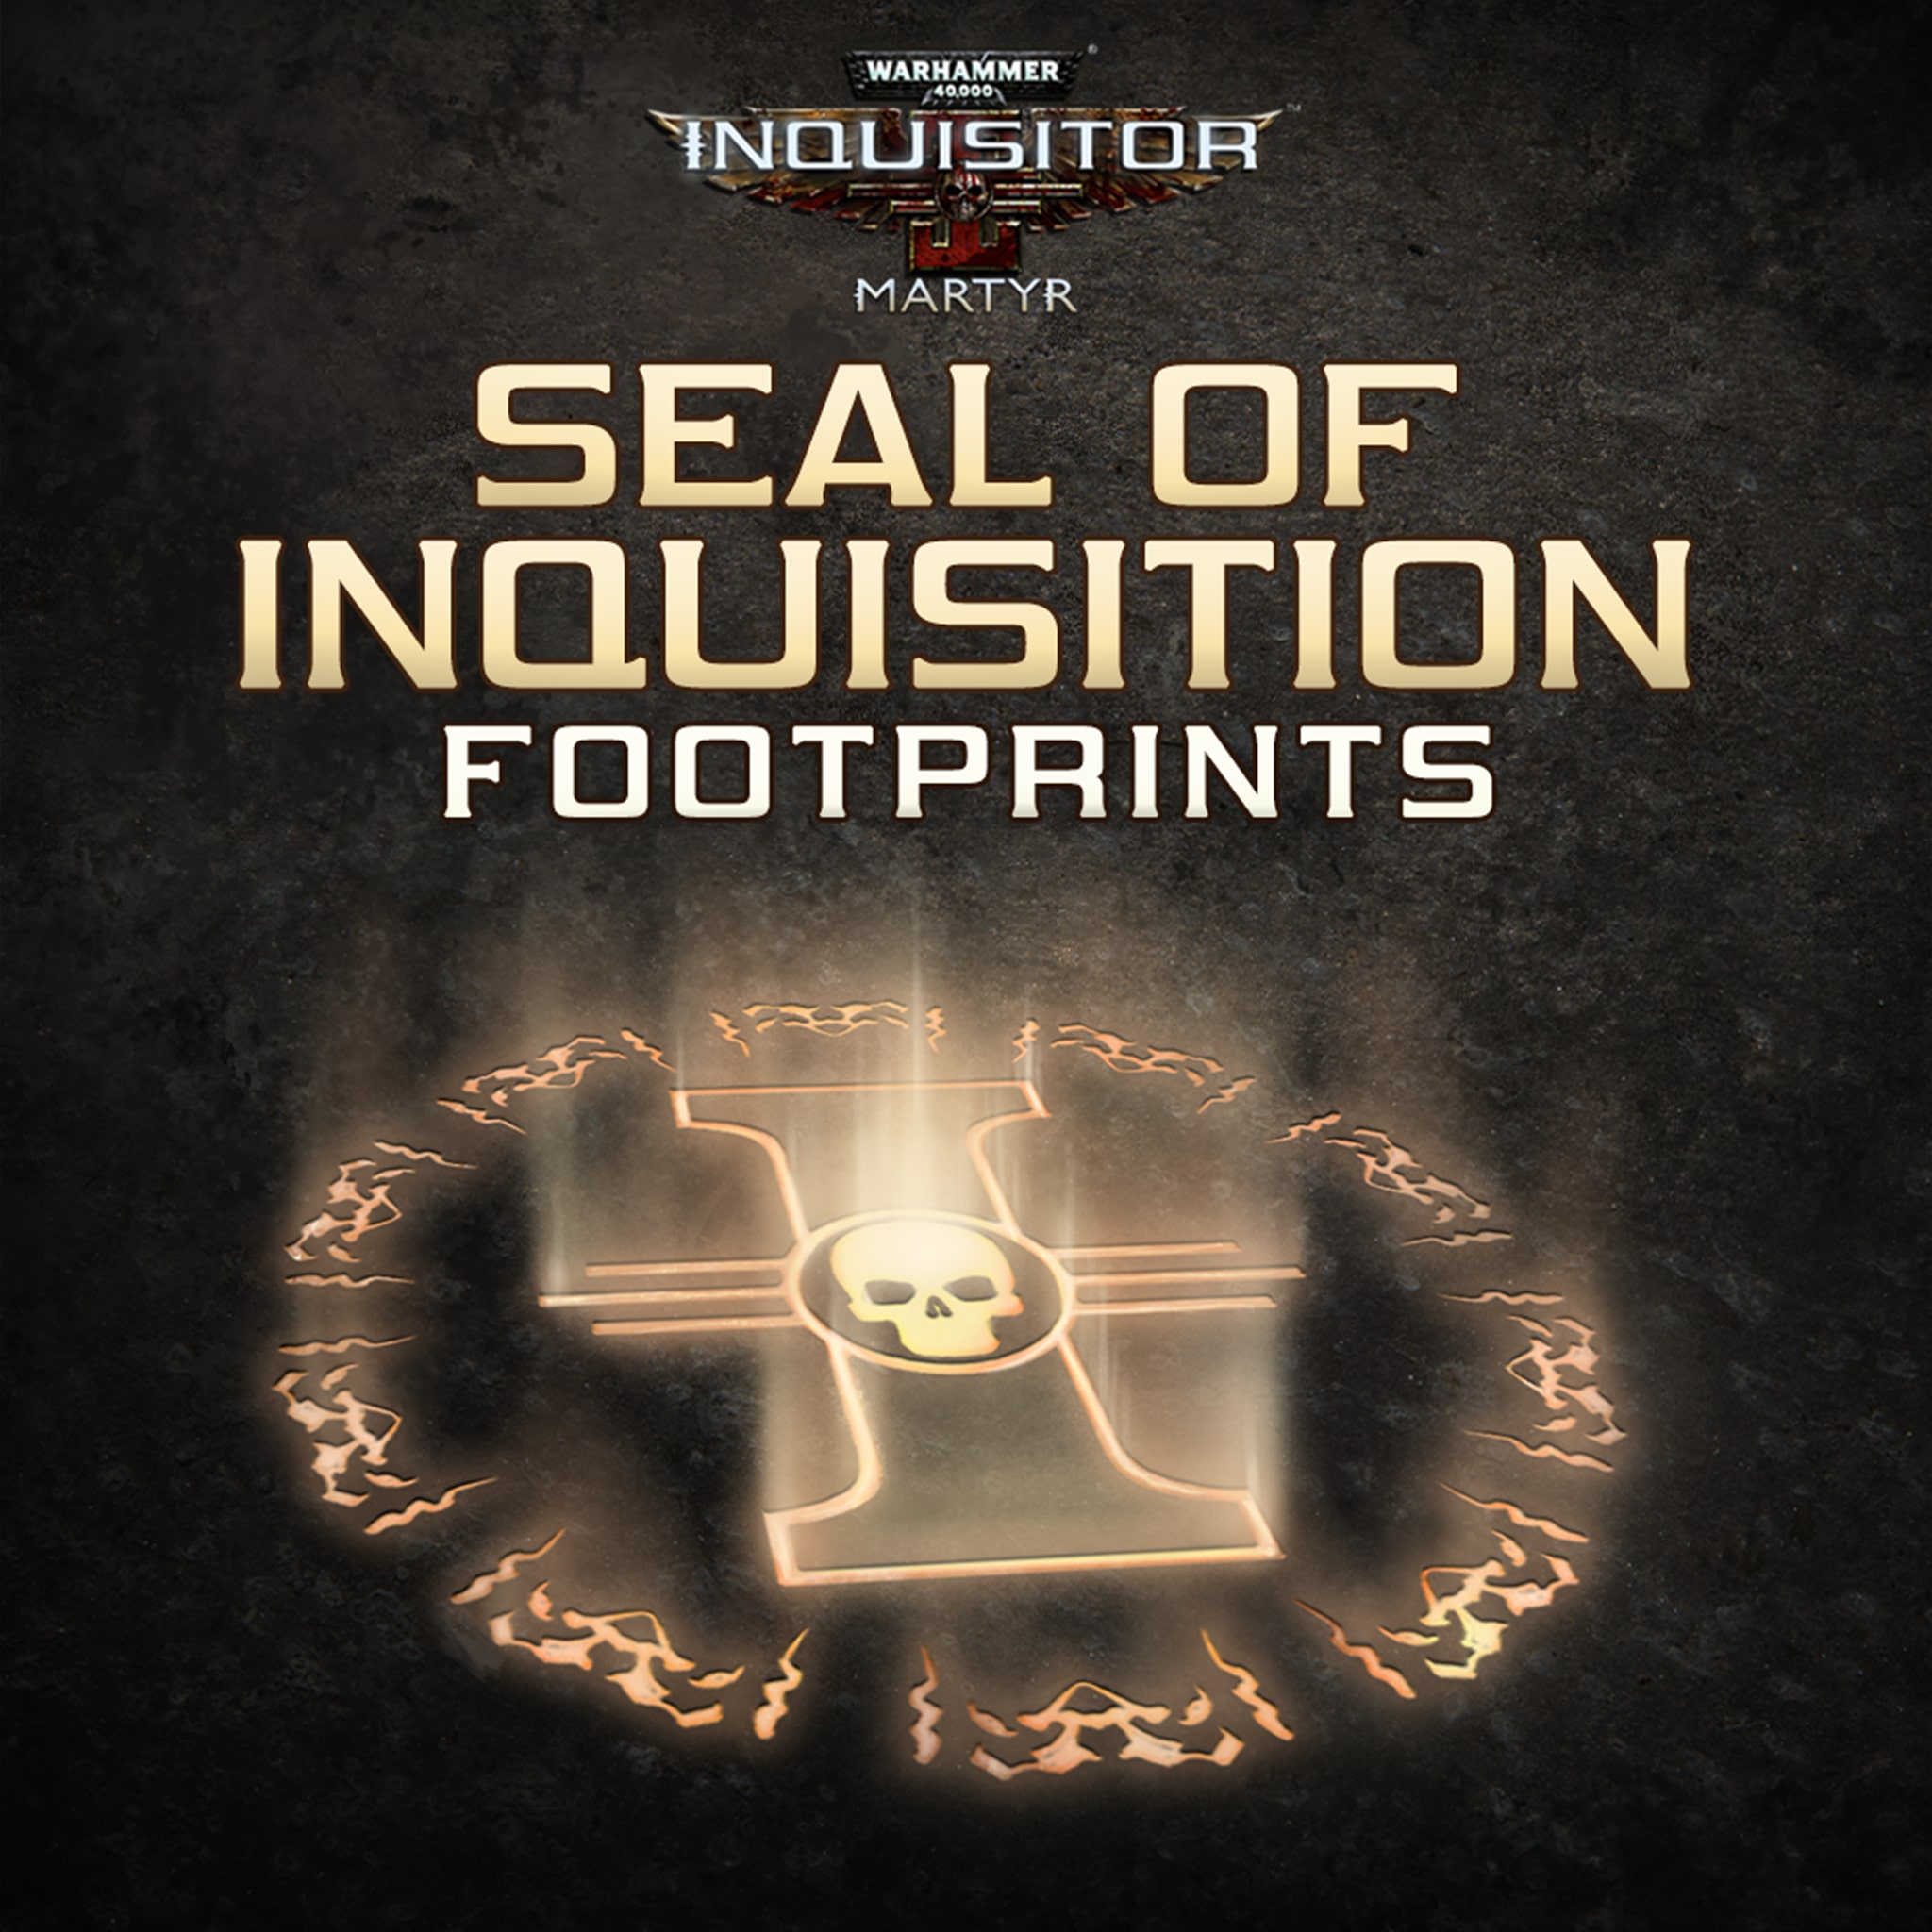 Warhammer 40,000: Inquisitor - Martyr - Seal of Inquisition